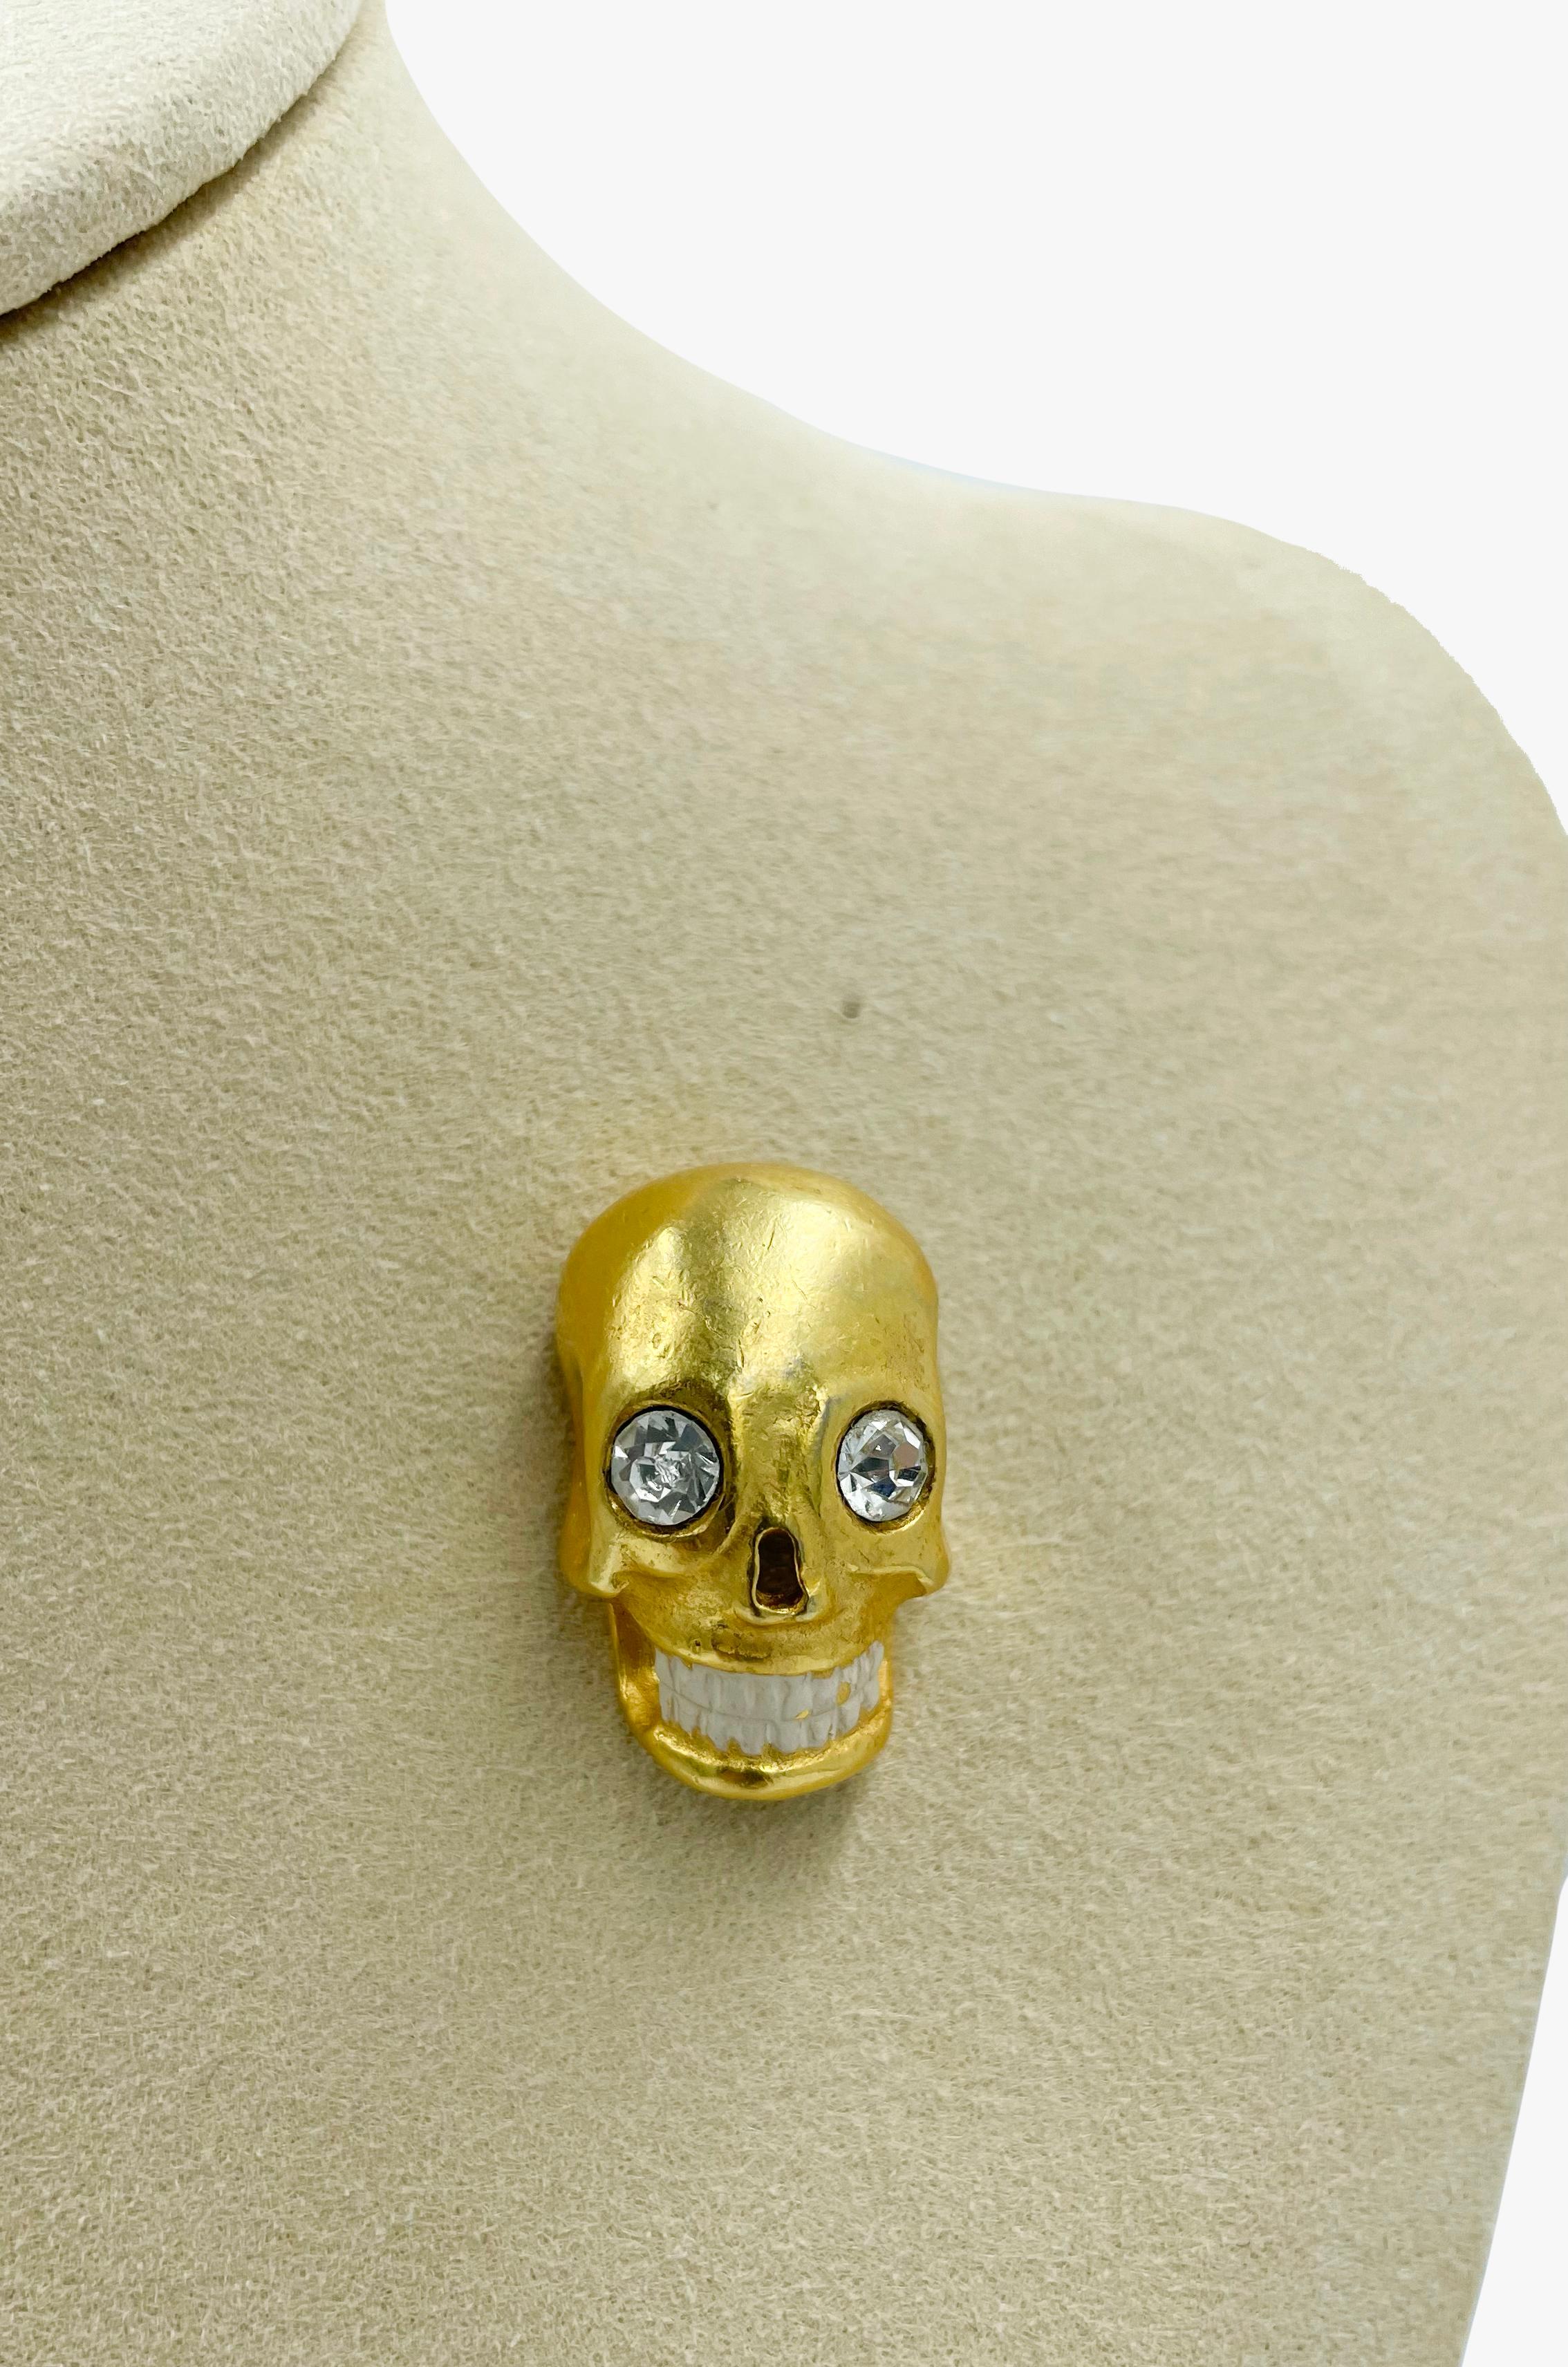 Chloe gold tone skull-shaped pin brooch with rhinestones
Signed
Measurements – 2,5 х 1 cm
Condition – very good
........Additional information ........

- Photo might be slightly different from actual item in terms of color due to the lighting